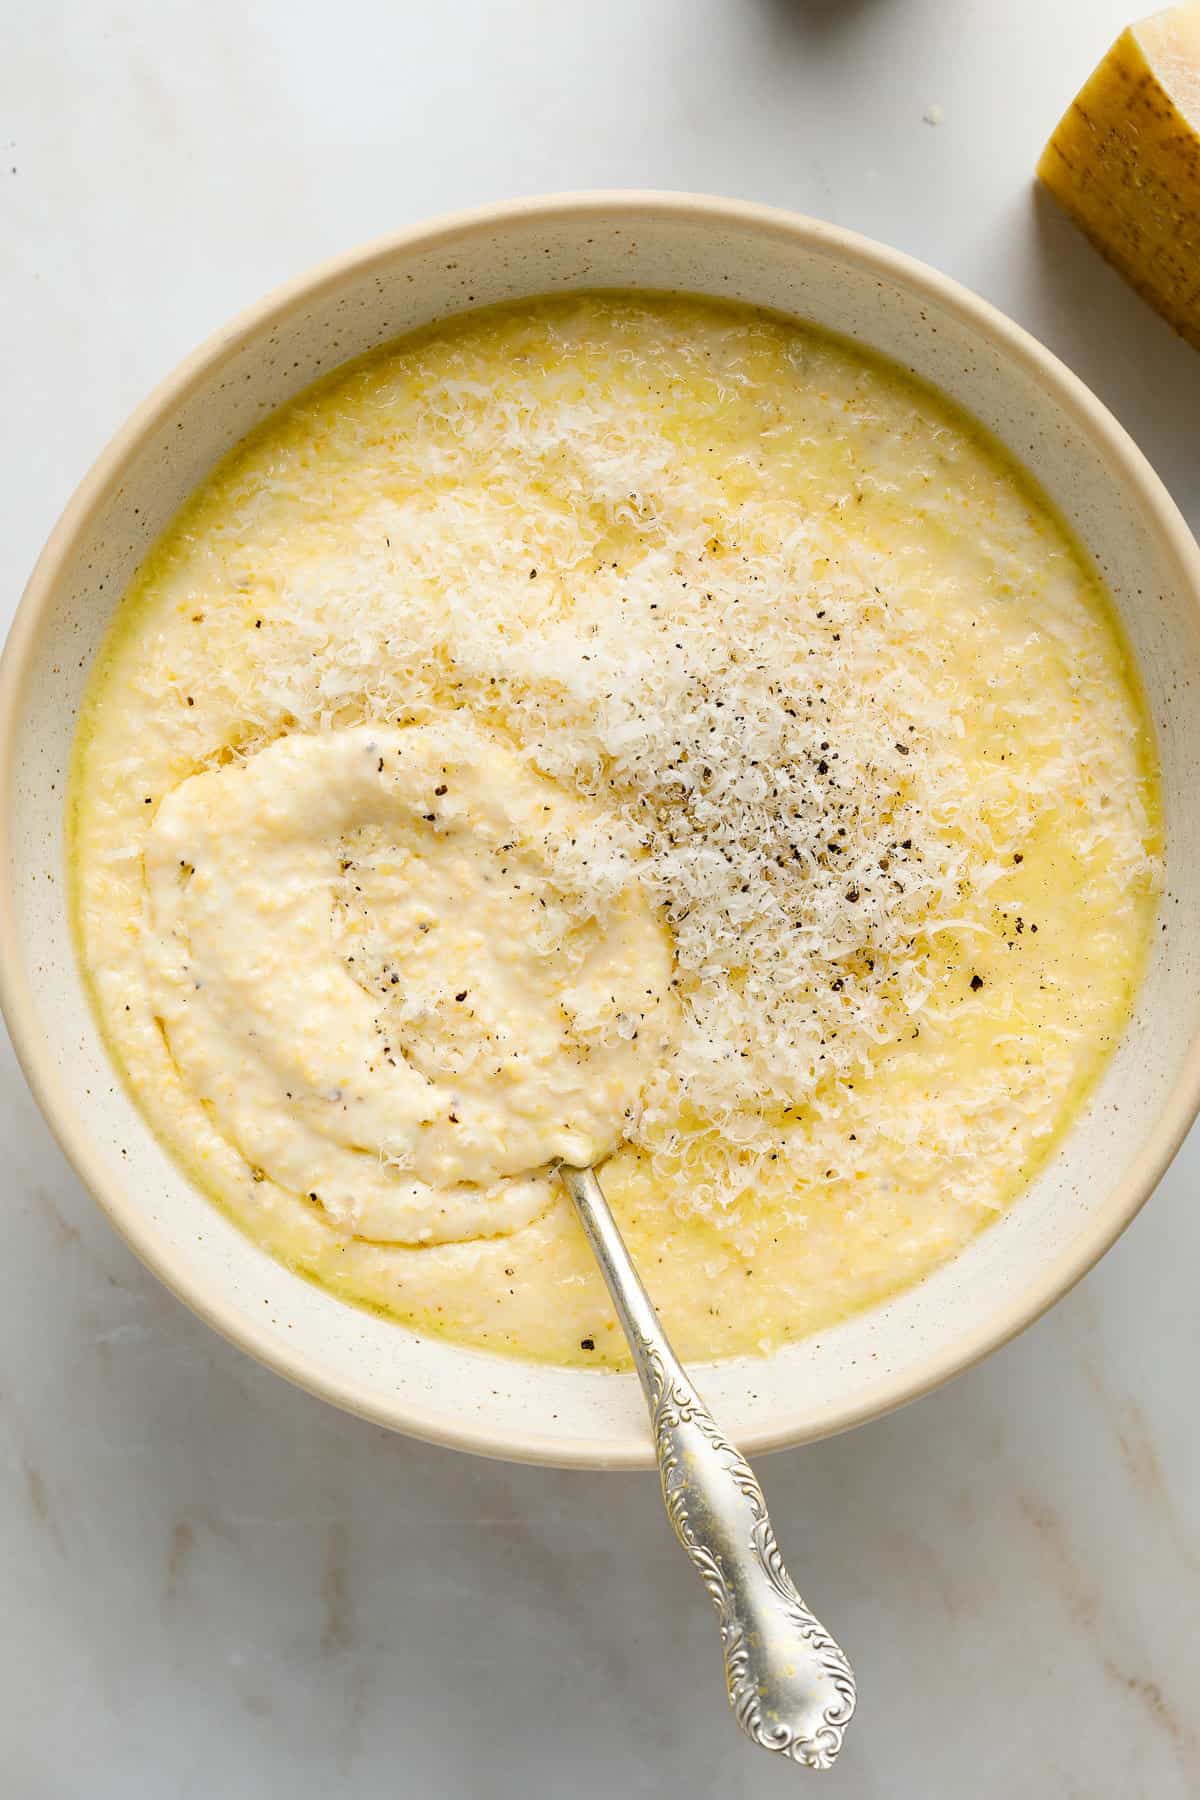 A white speckled ceramic bowl filled with cooked polenta and topped with grated parmesan cheese.